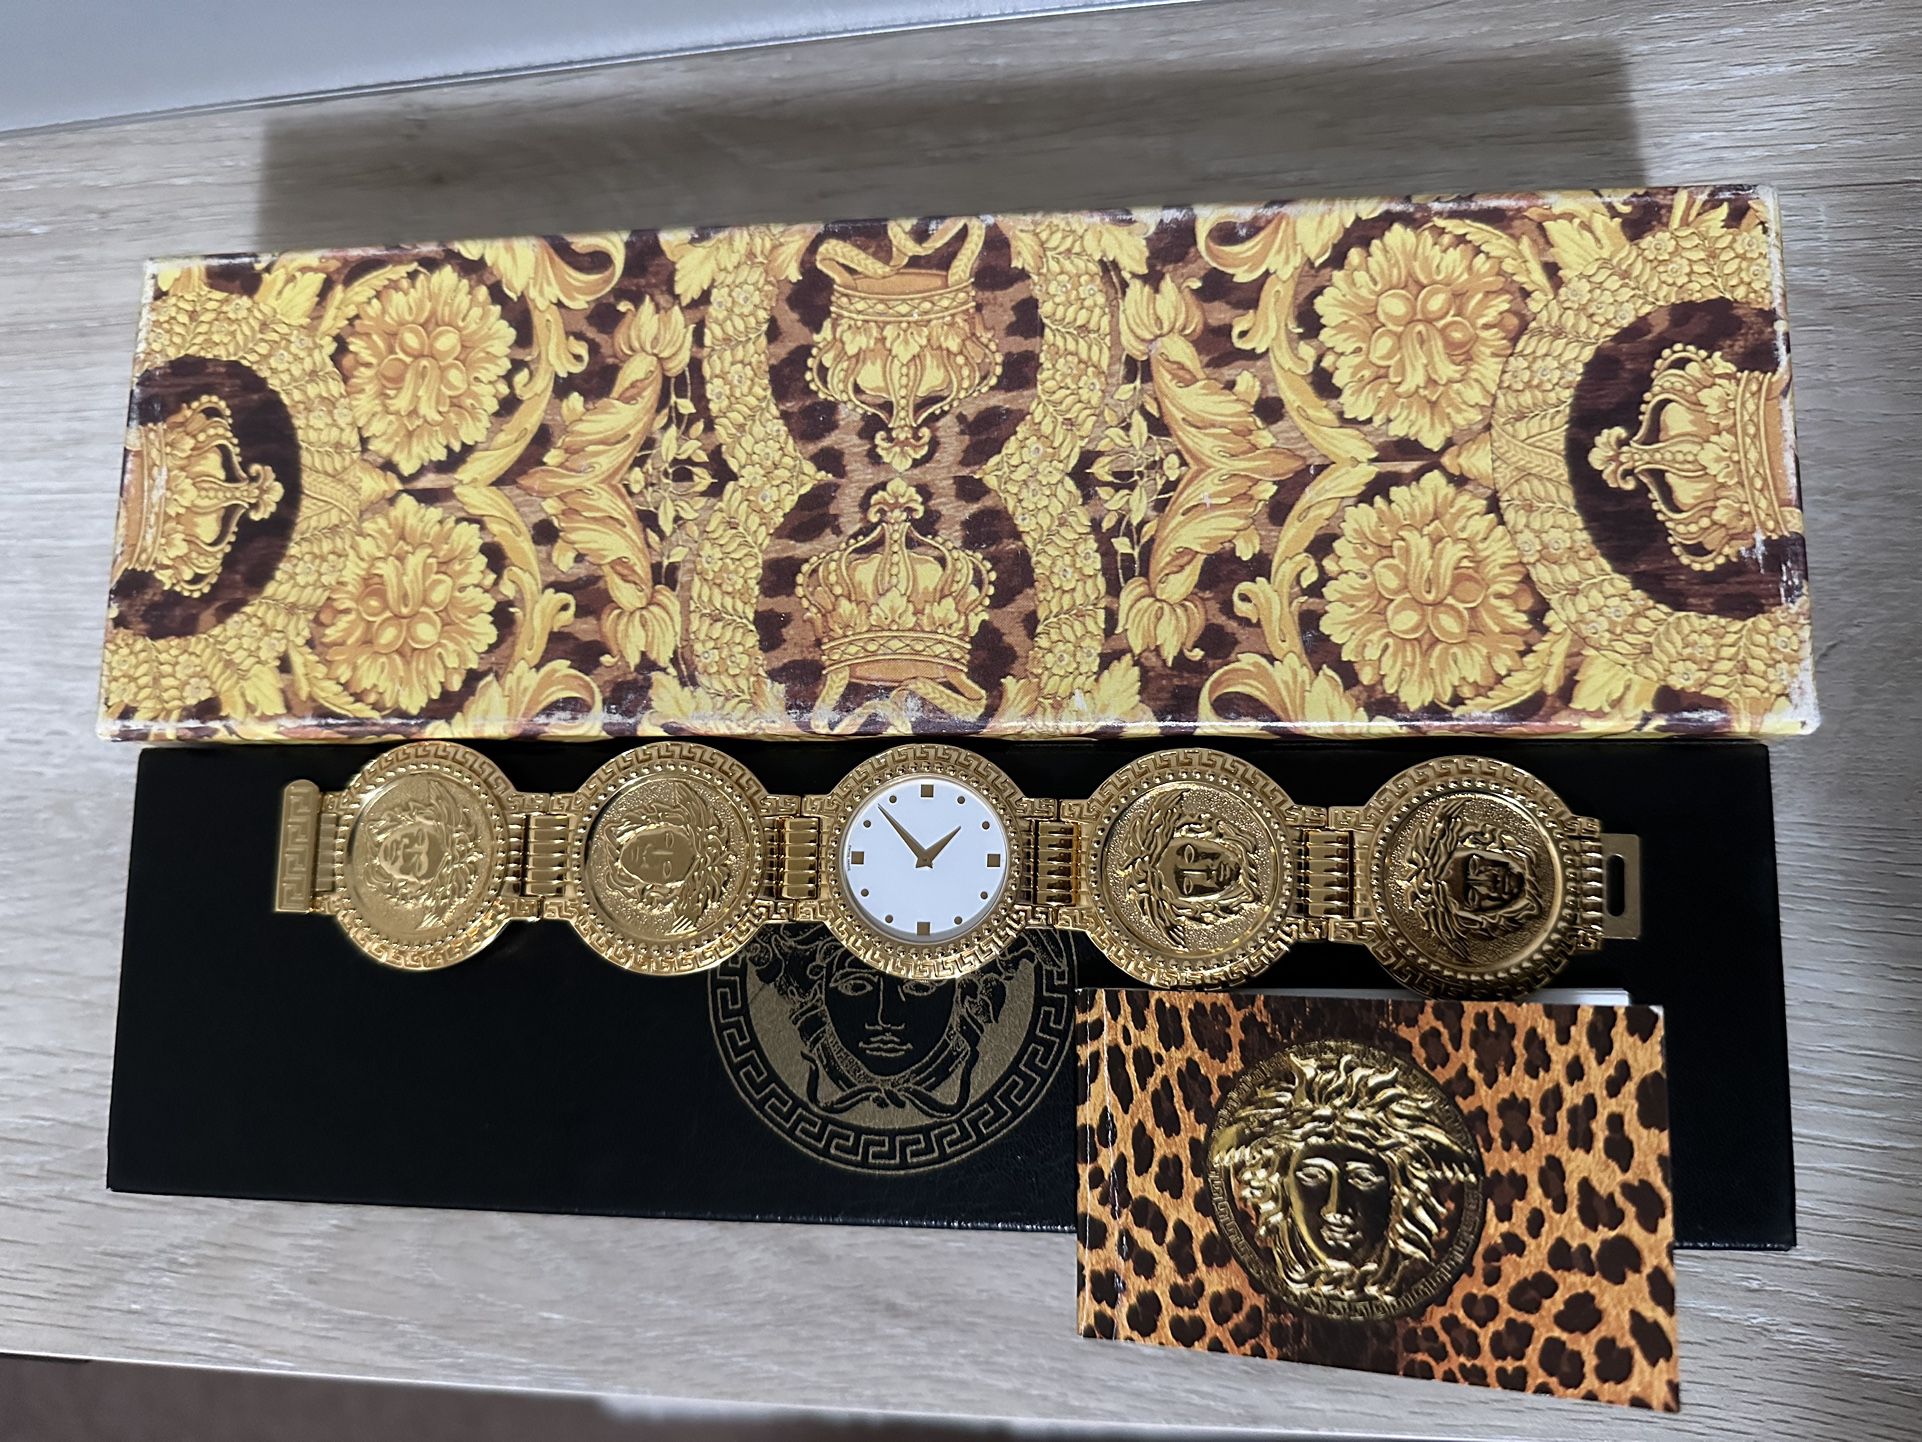 GIANNI VERSACE Signature G10 Gold-Plated Watch 